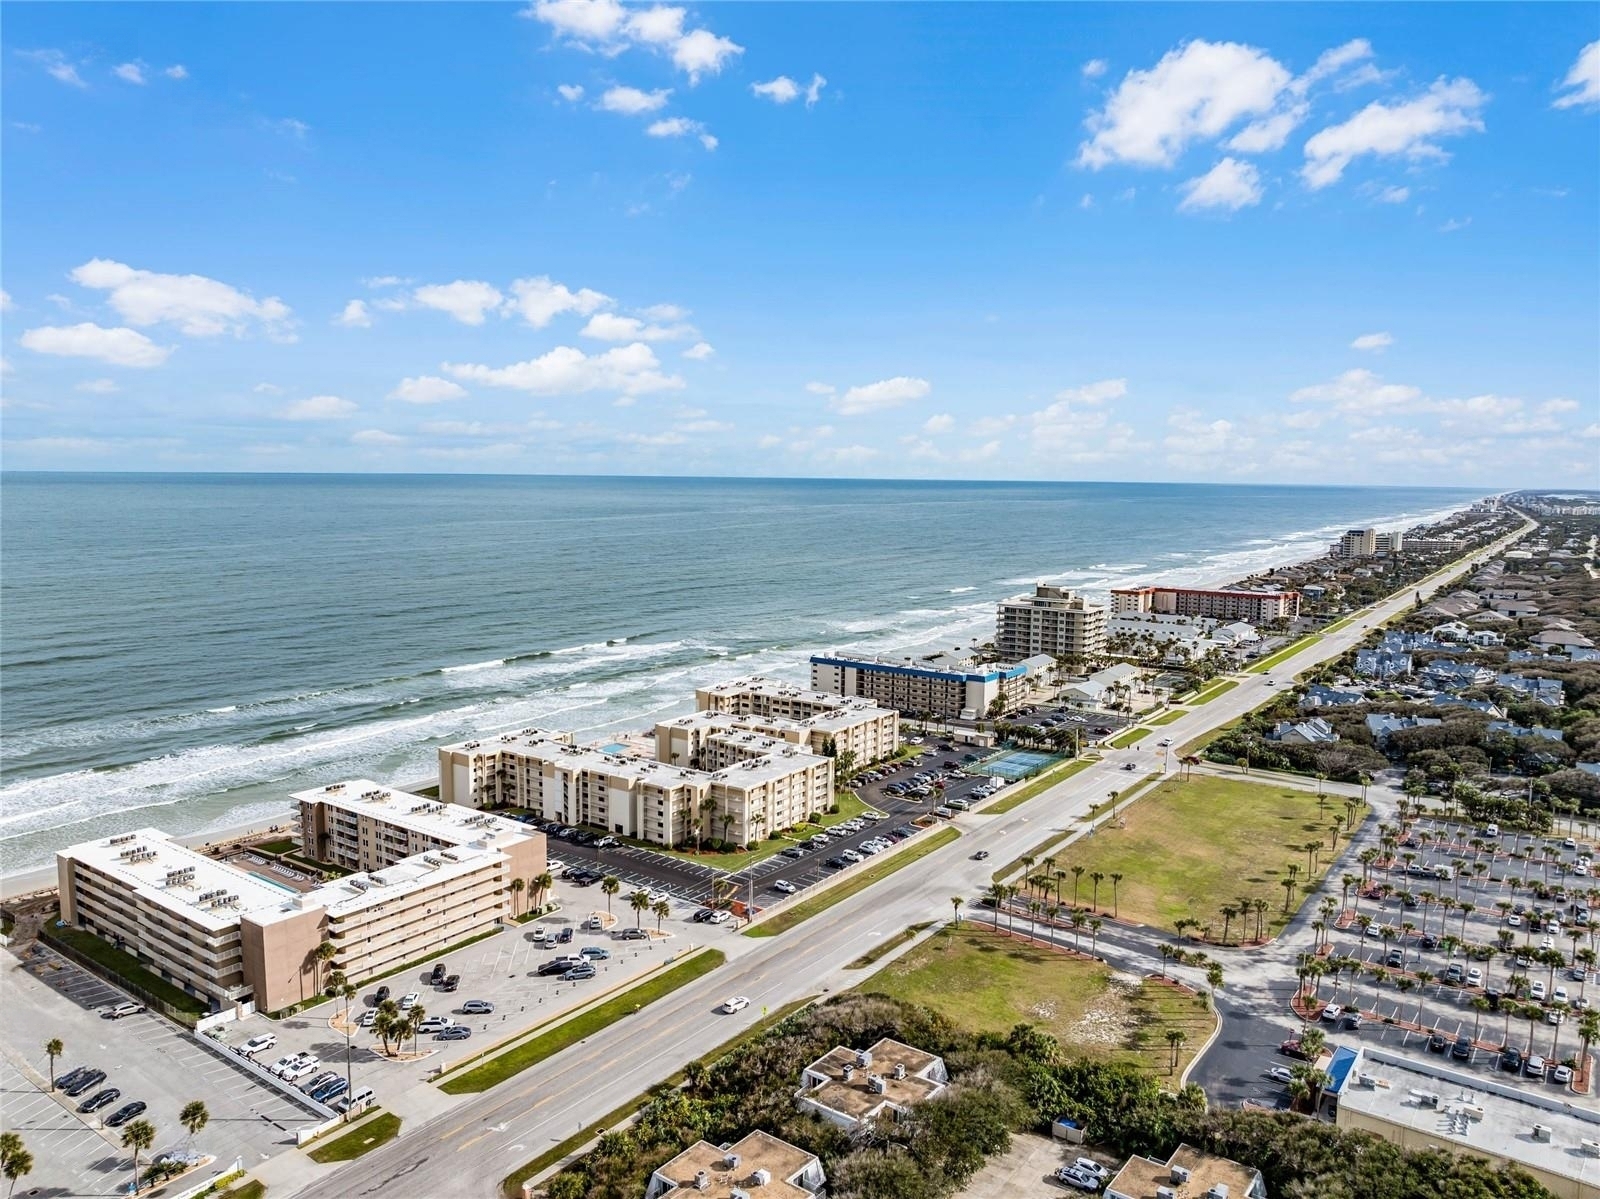 NSB Homes sells Castle Reef condos in New Smyrna Beach 386-235-8588